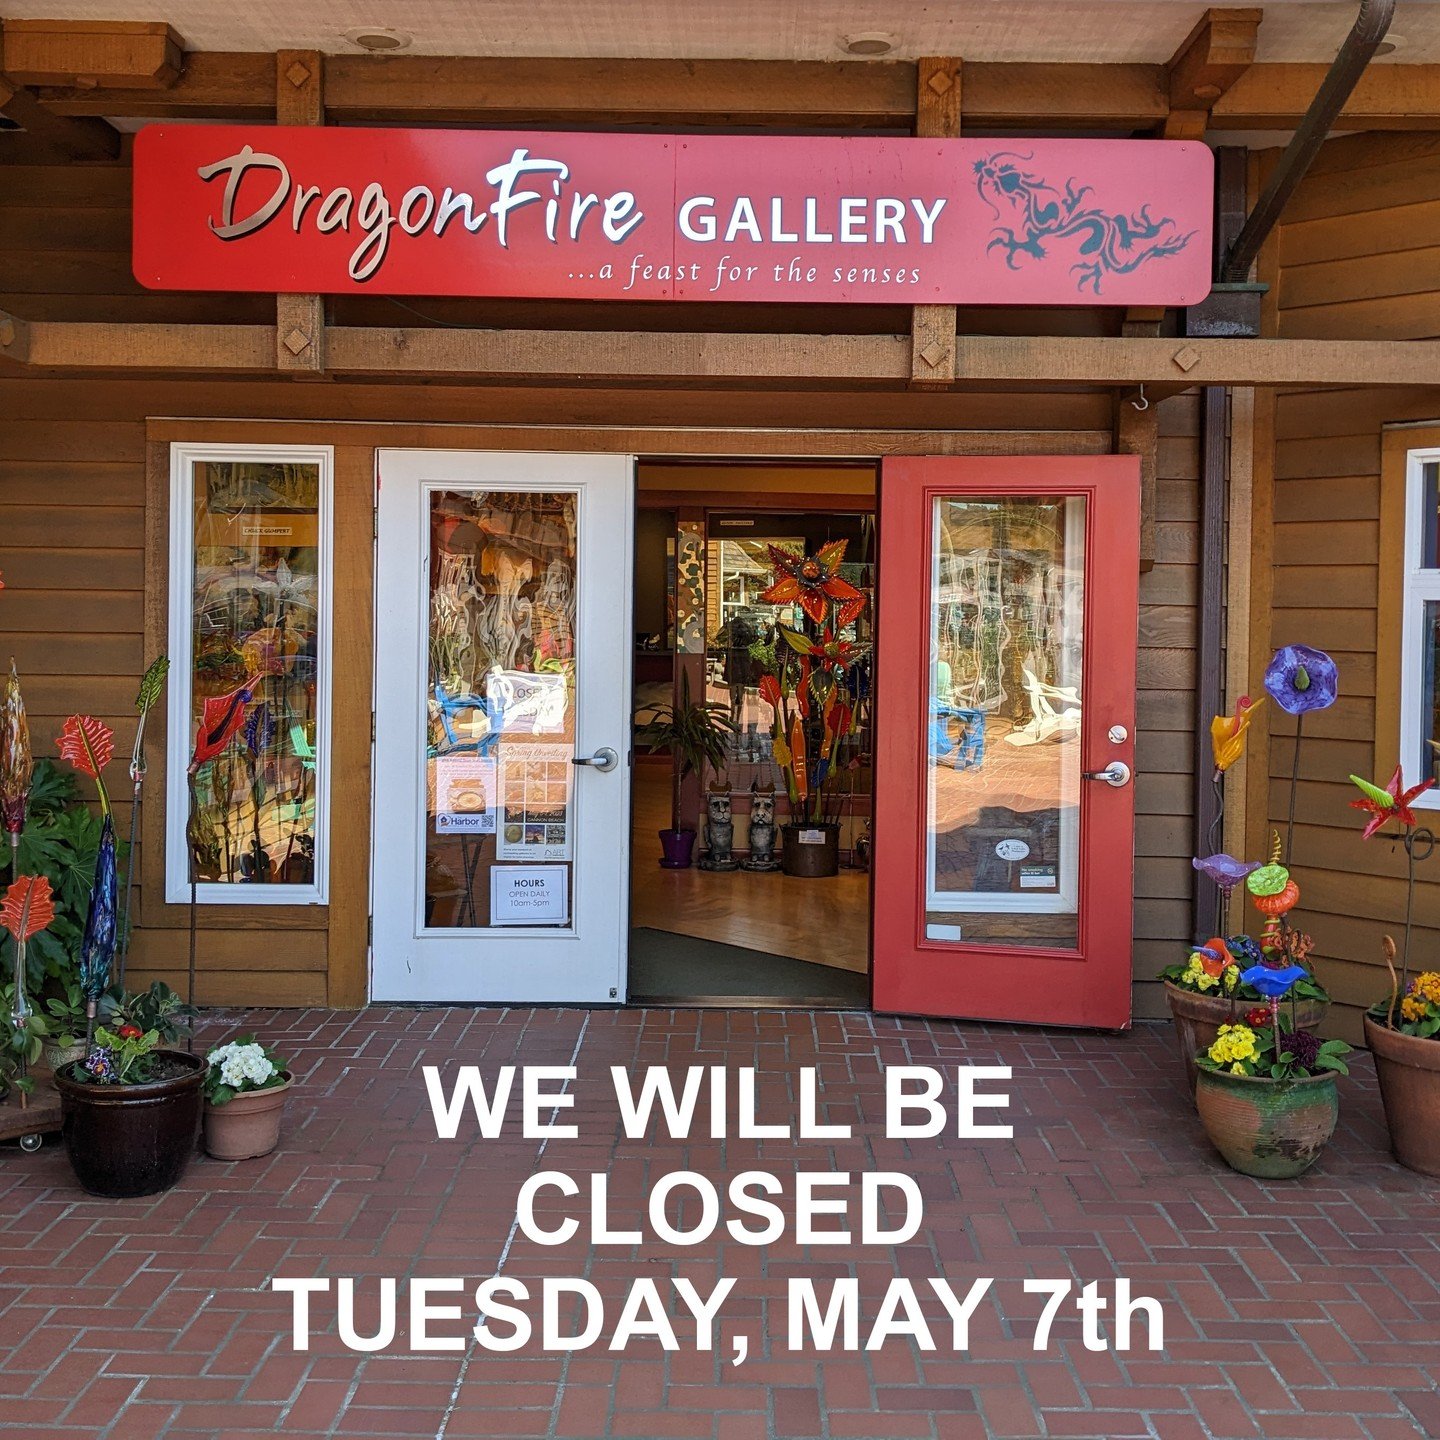 After a wonderful Spring Unveiling Arts Festival weekend, we're taking a day to catch our breath. We will be closed Tuesday, May 7th and will be back to business on the 8th. See you then!

Thank you to all our amazing artists, customers and gallery f